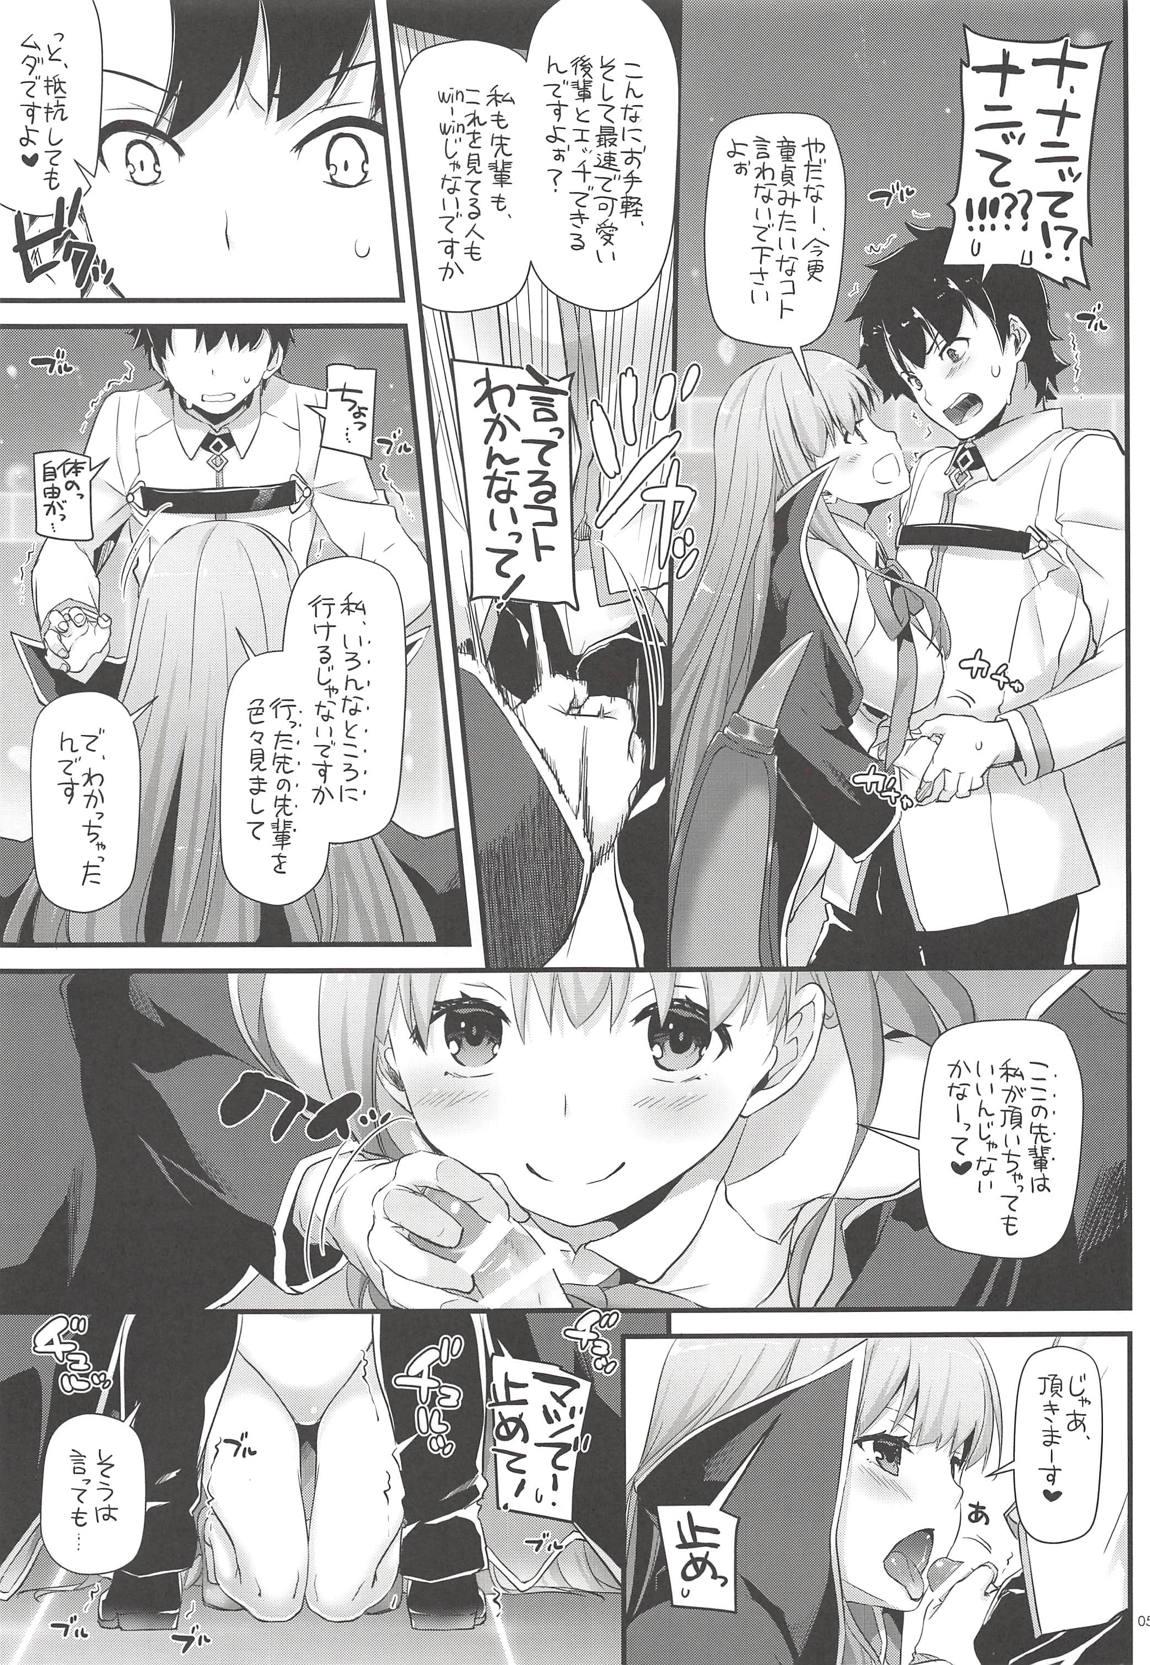 Deepthroat D.L. action 124 - Fate grand order Thailand - Page 4